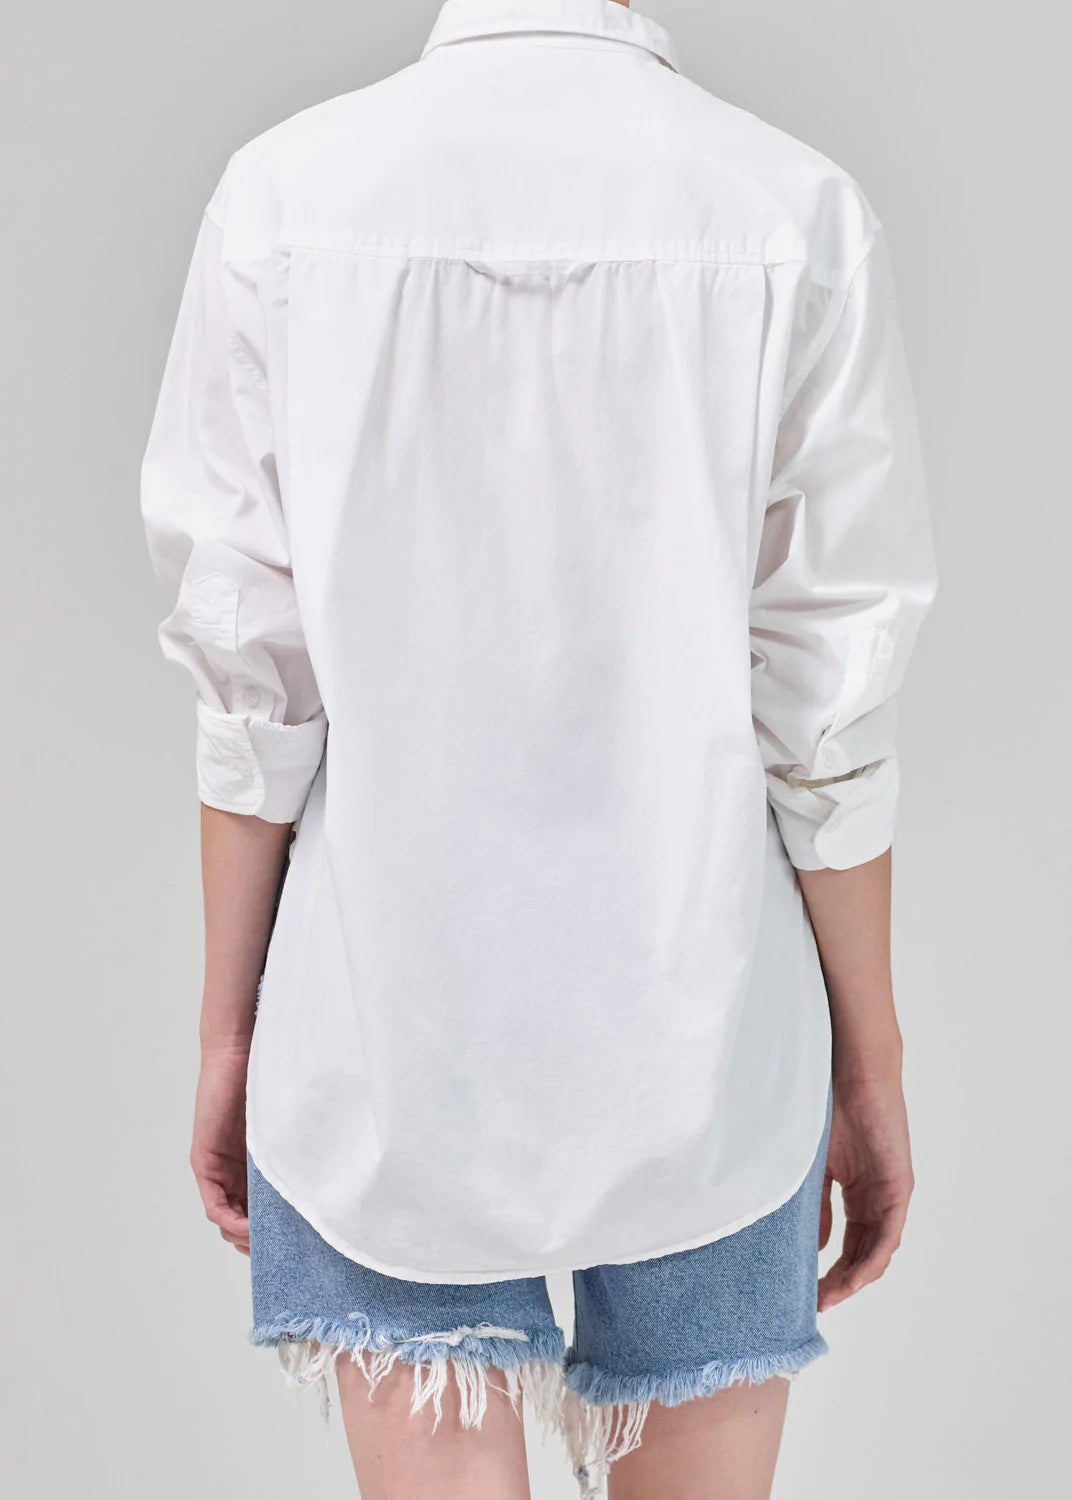 Citizens of Humanity - Kayla Shirt in Optic White